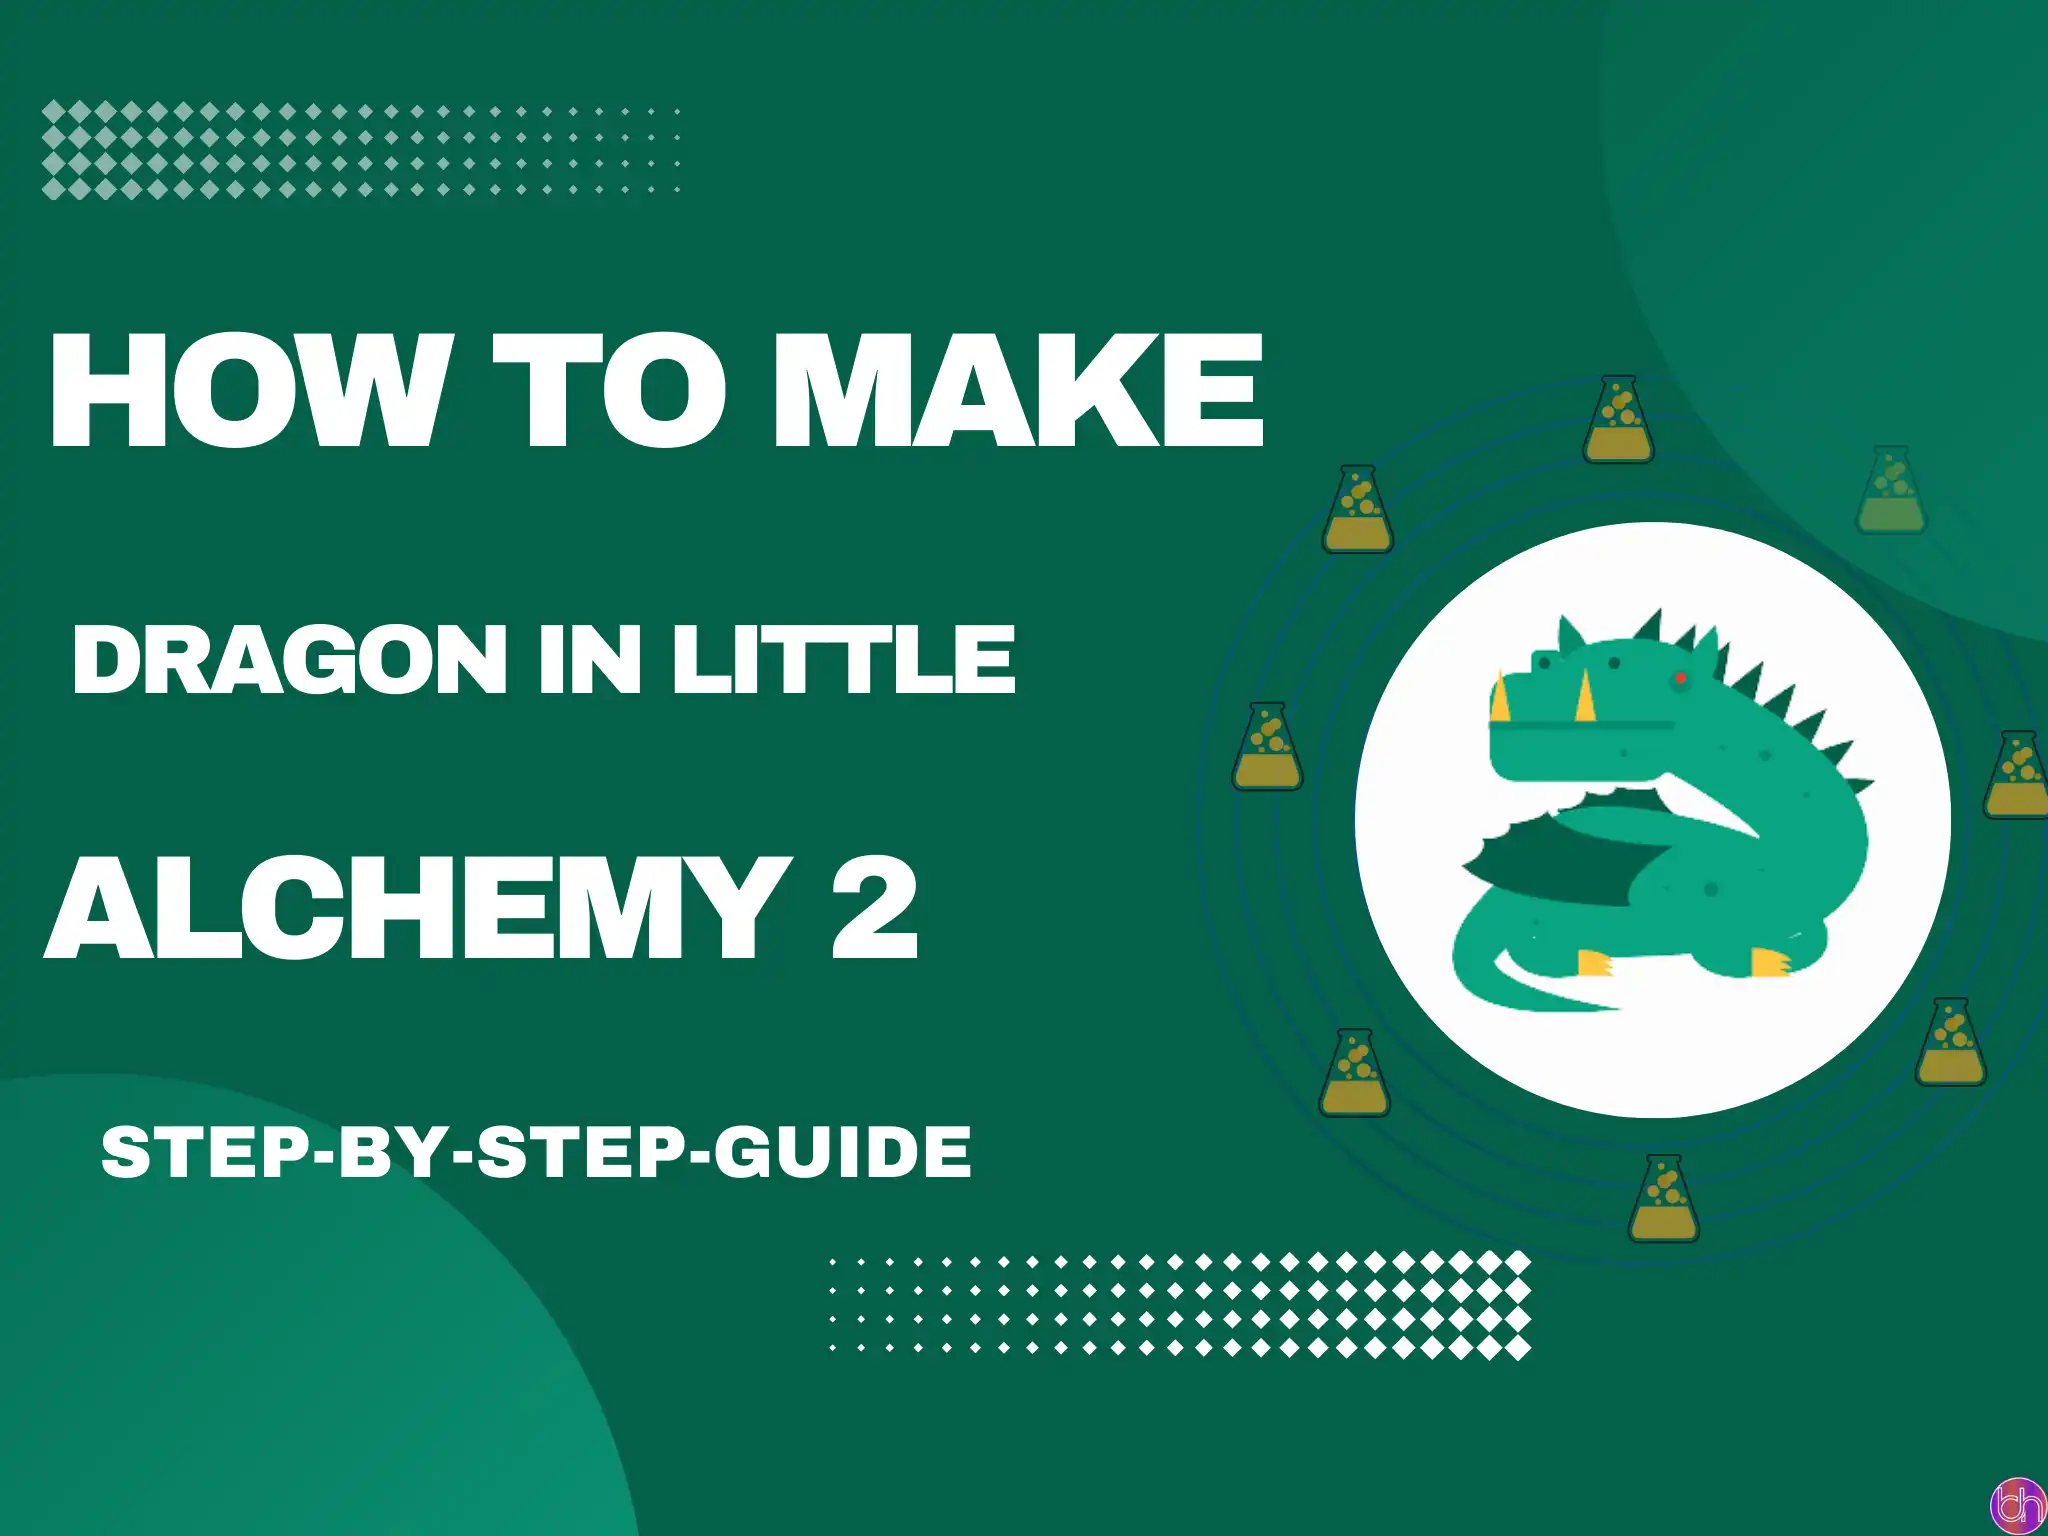 How to make Dragon in Little Alchemy 2